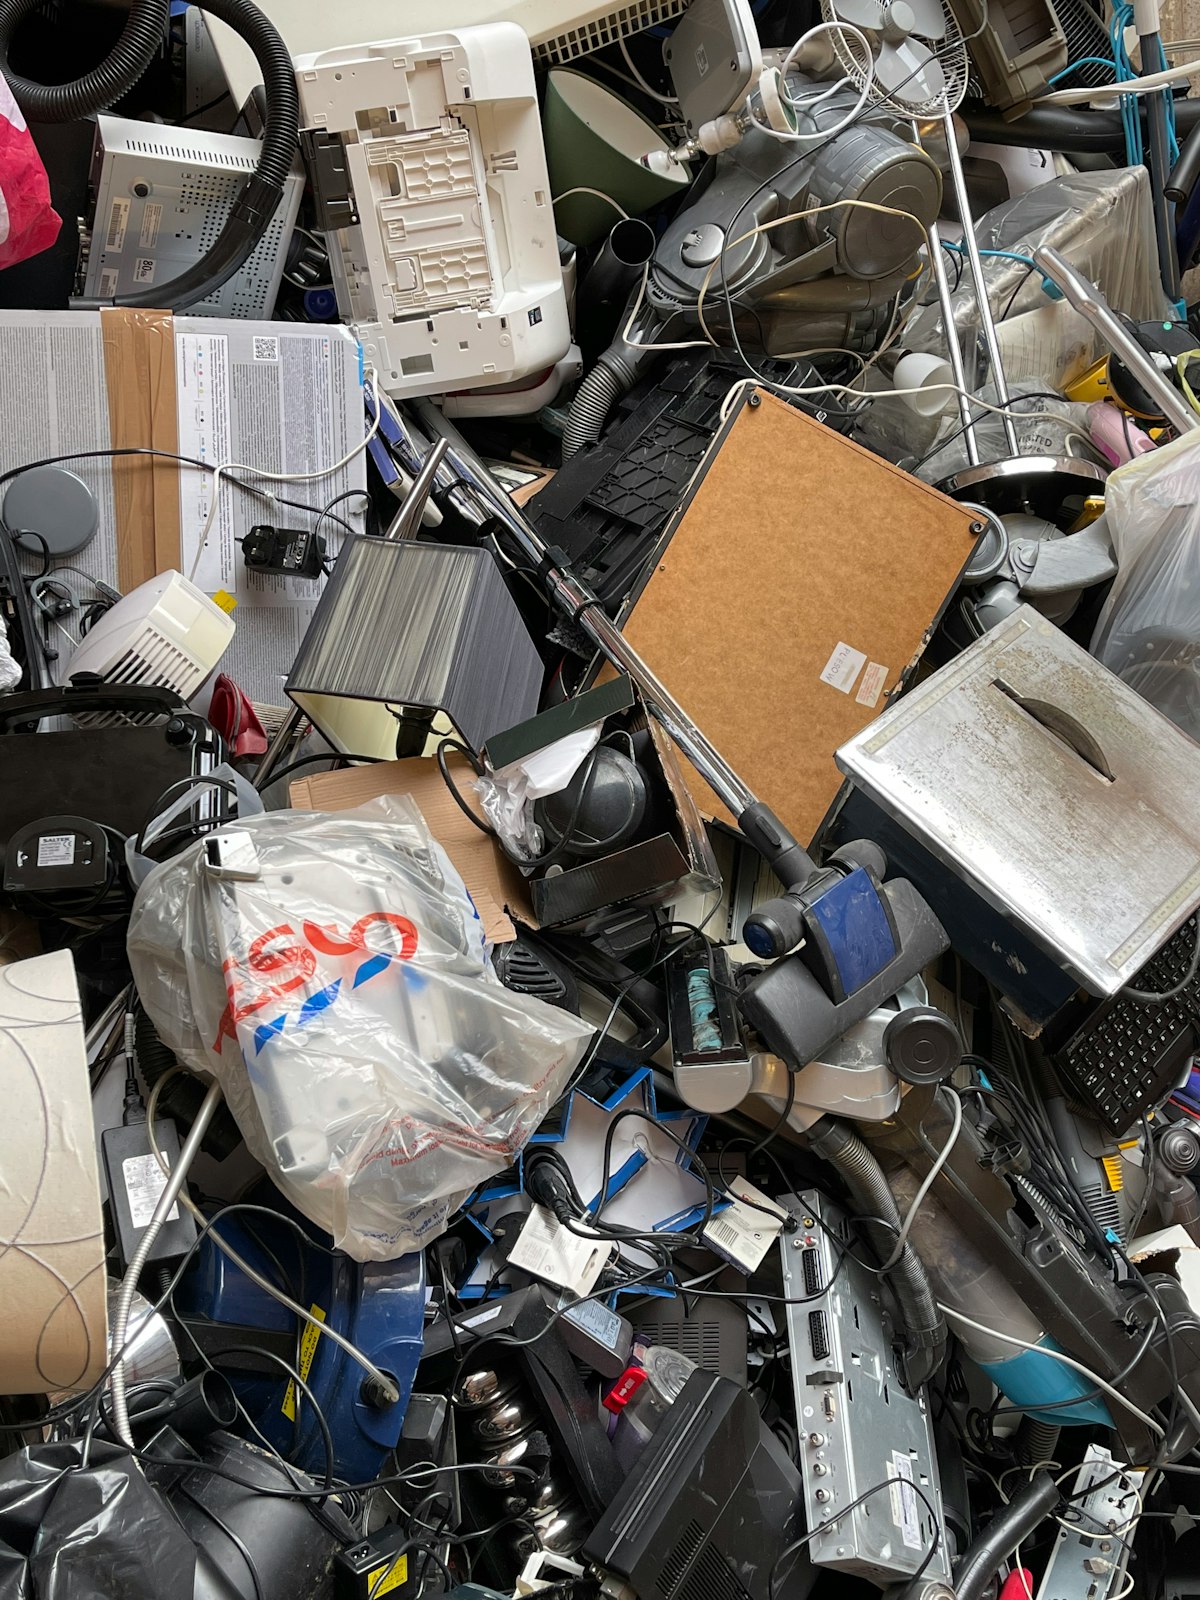 Mexico is among the leaders in e-waste output in the world